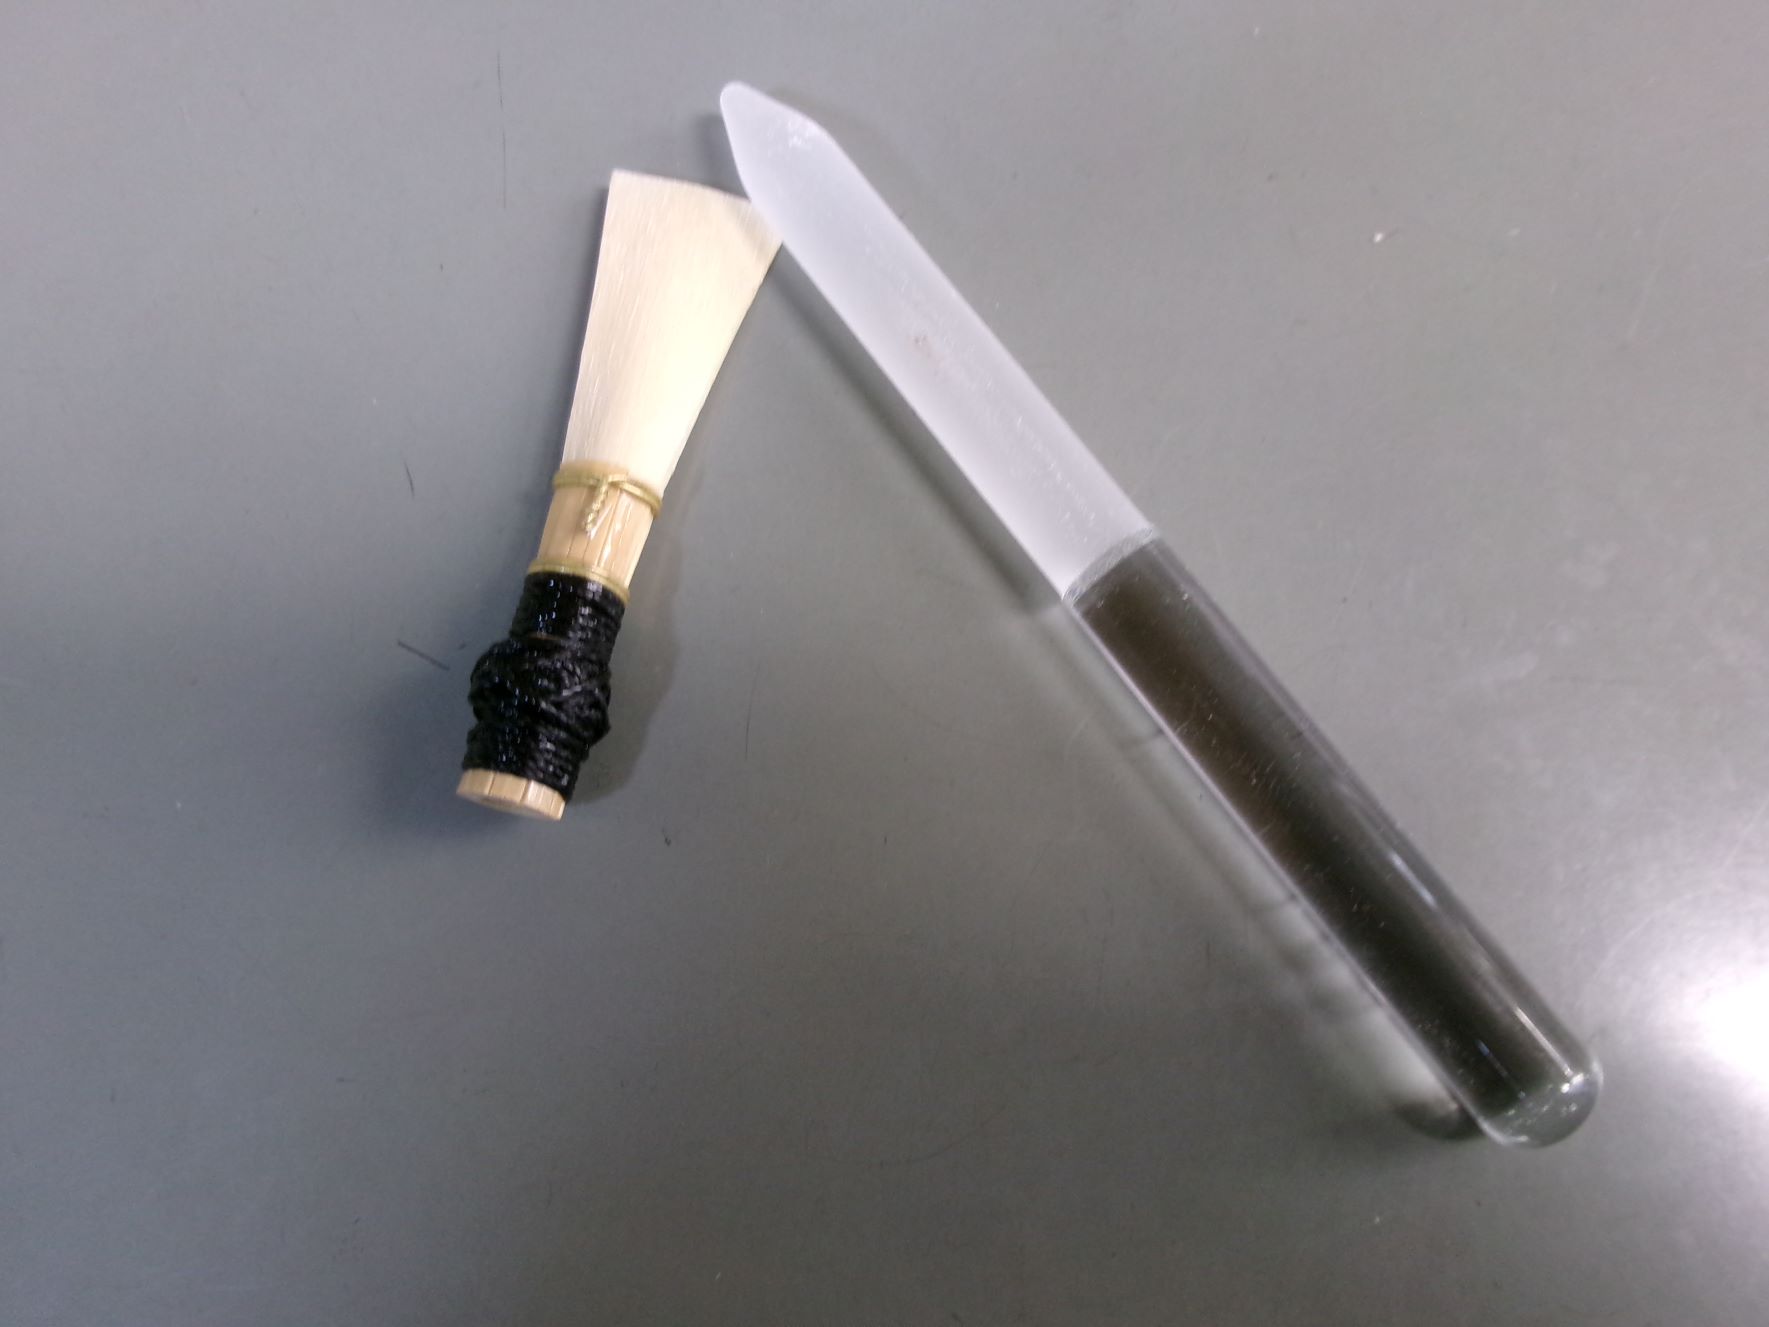 Glass file (tip finisher) for bassoon